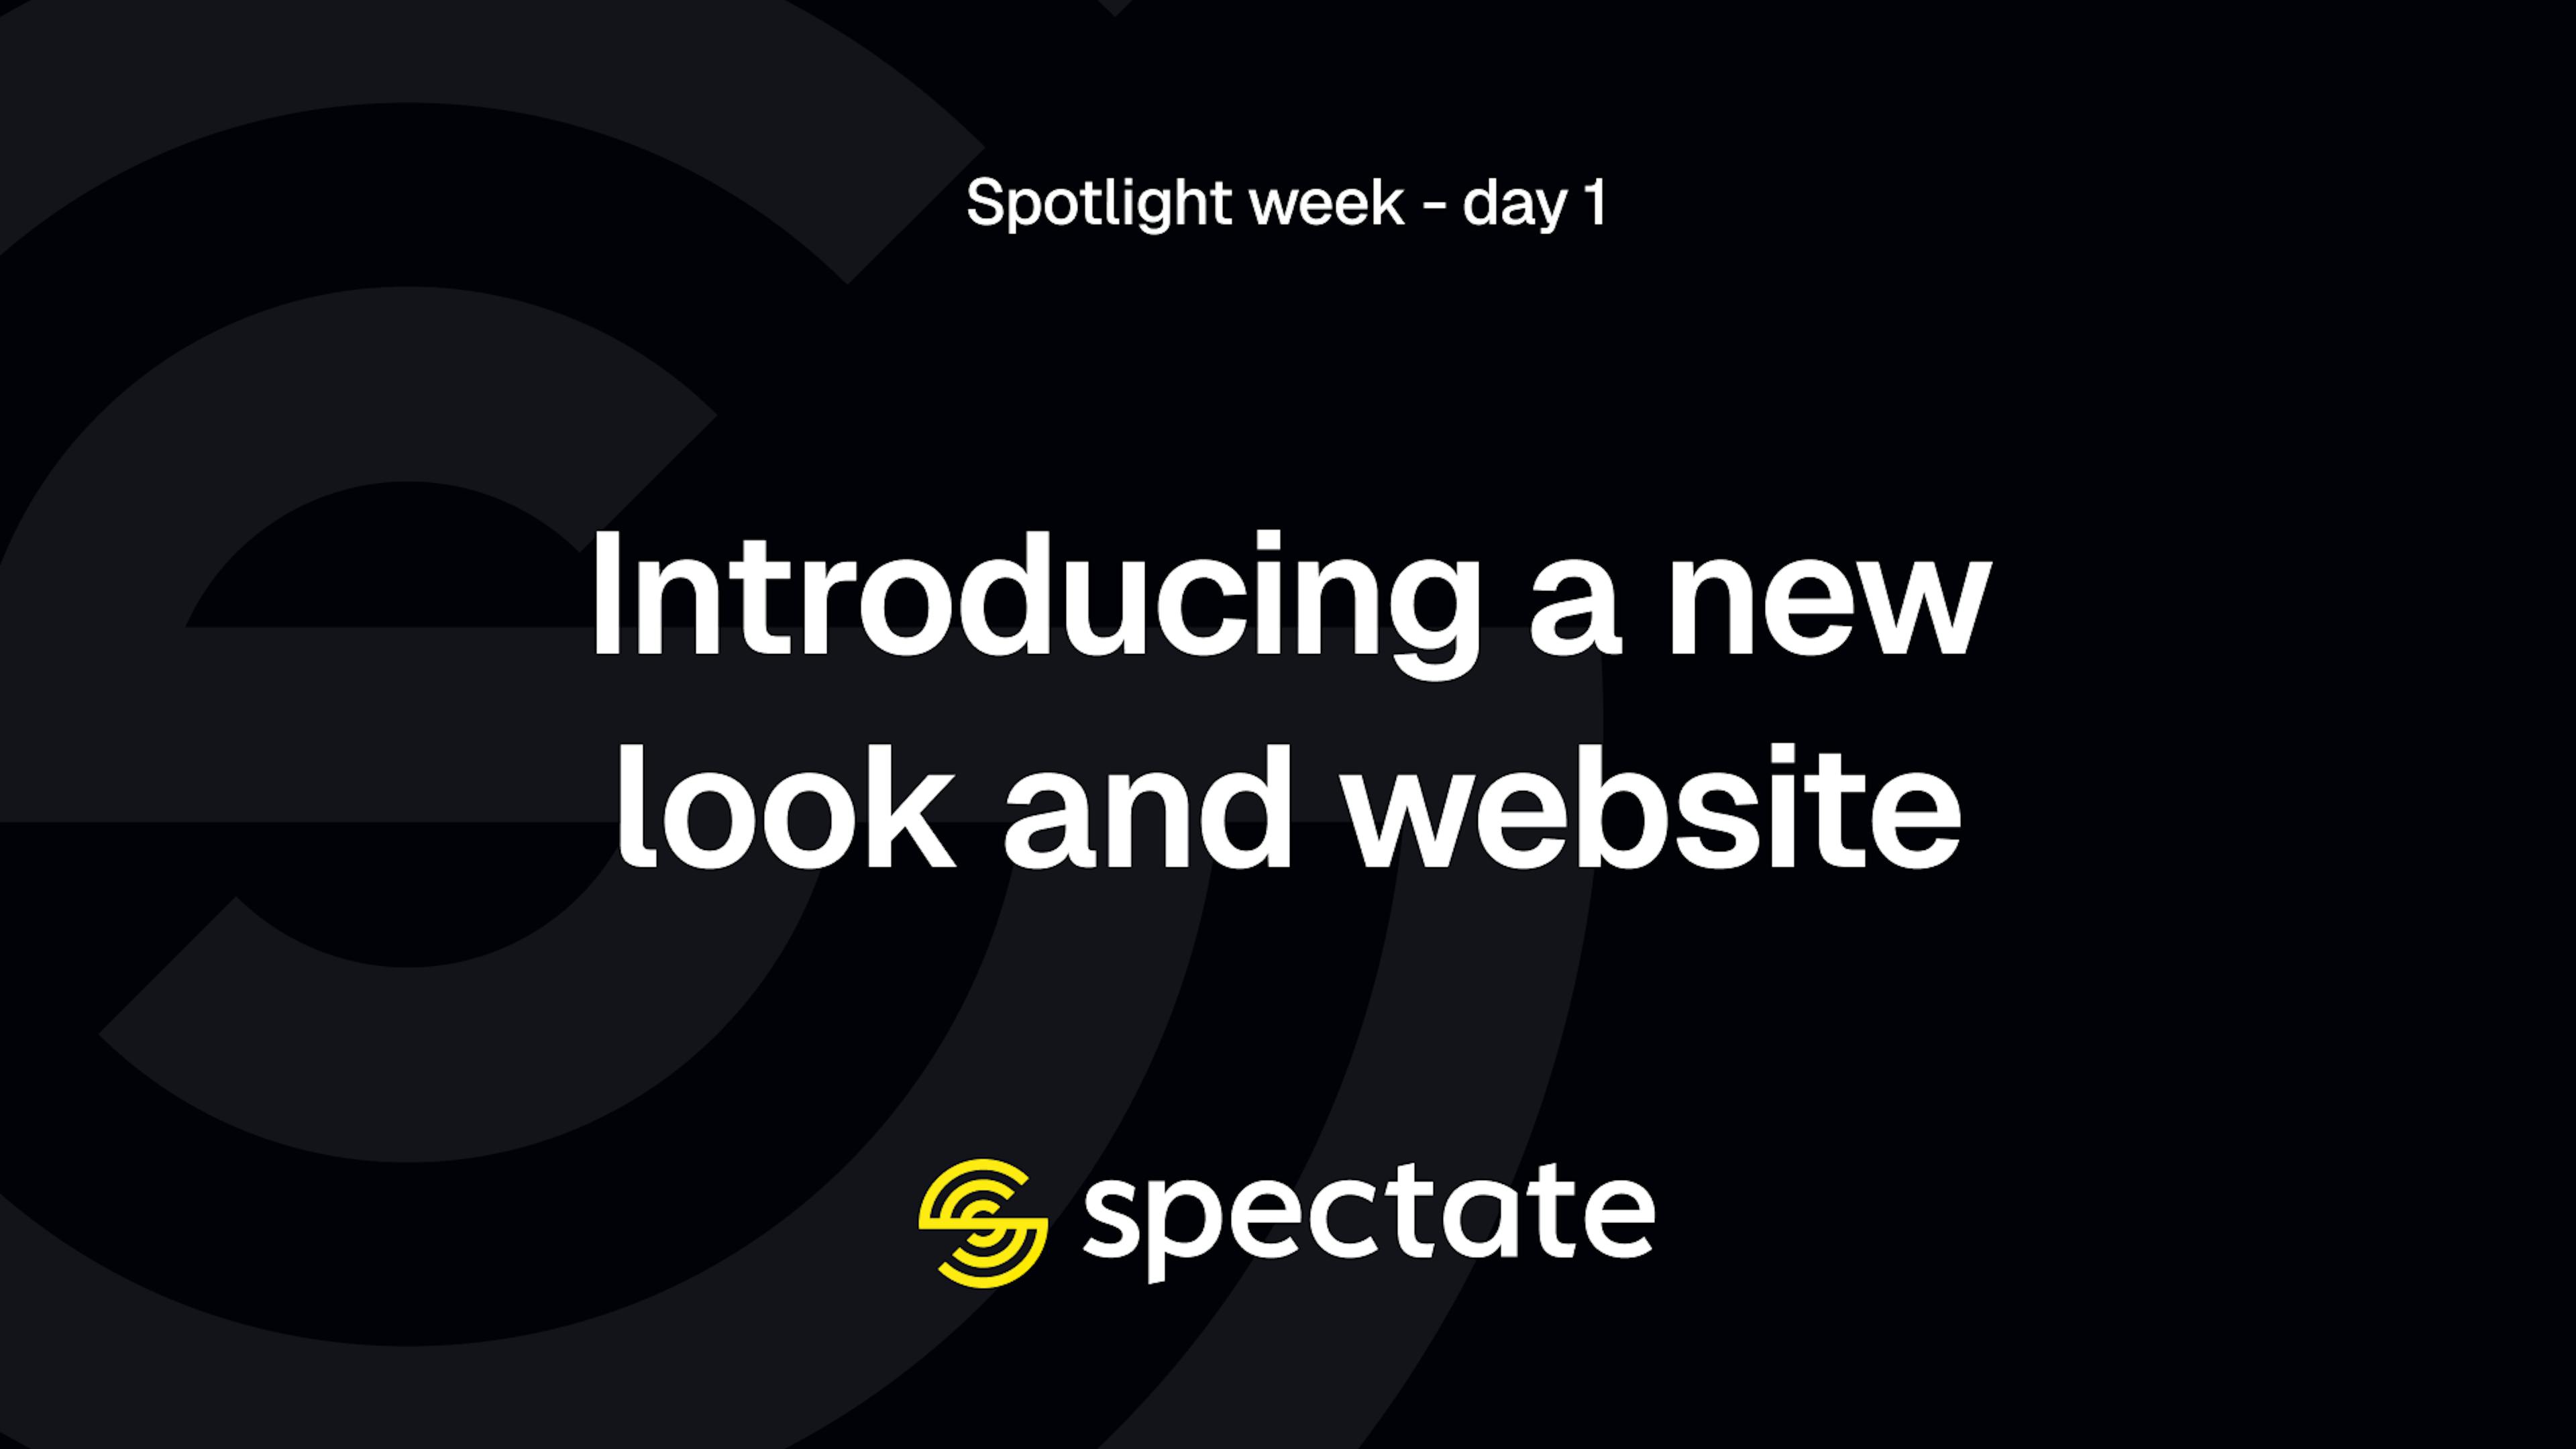 Spotlight week - day 1: Introducing a new look and website